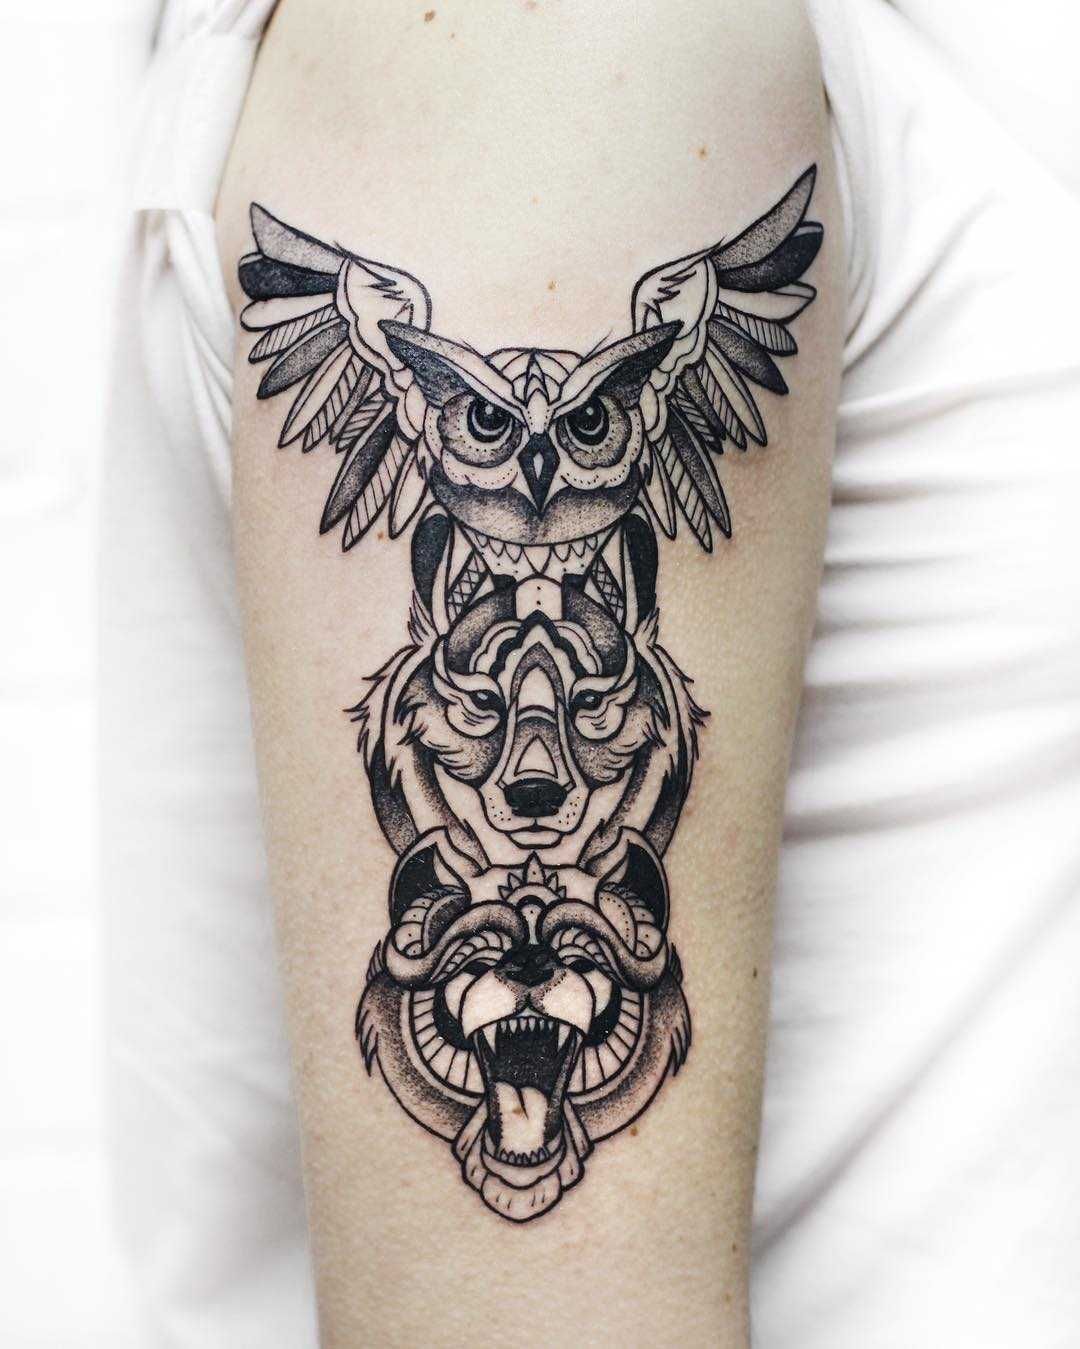 Totem tattoo meaning